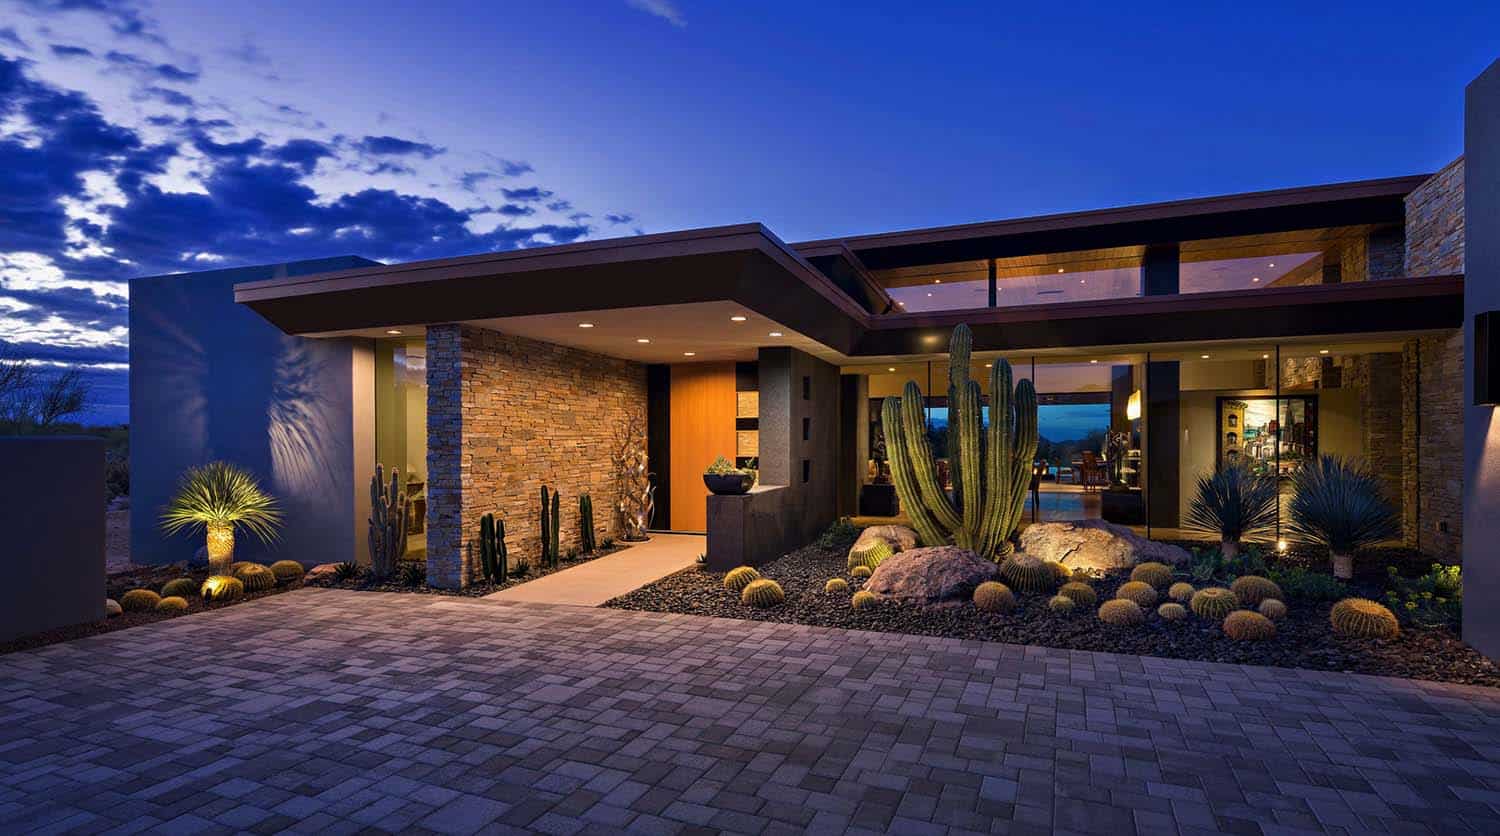 Fascinating modern desert home melds into the Sonoran landscape